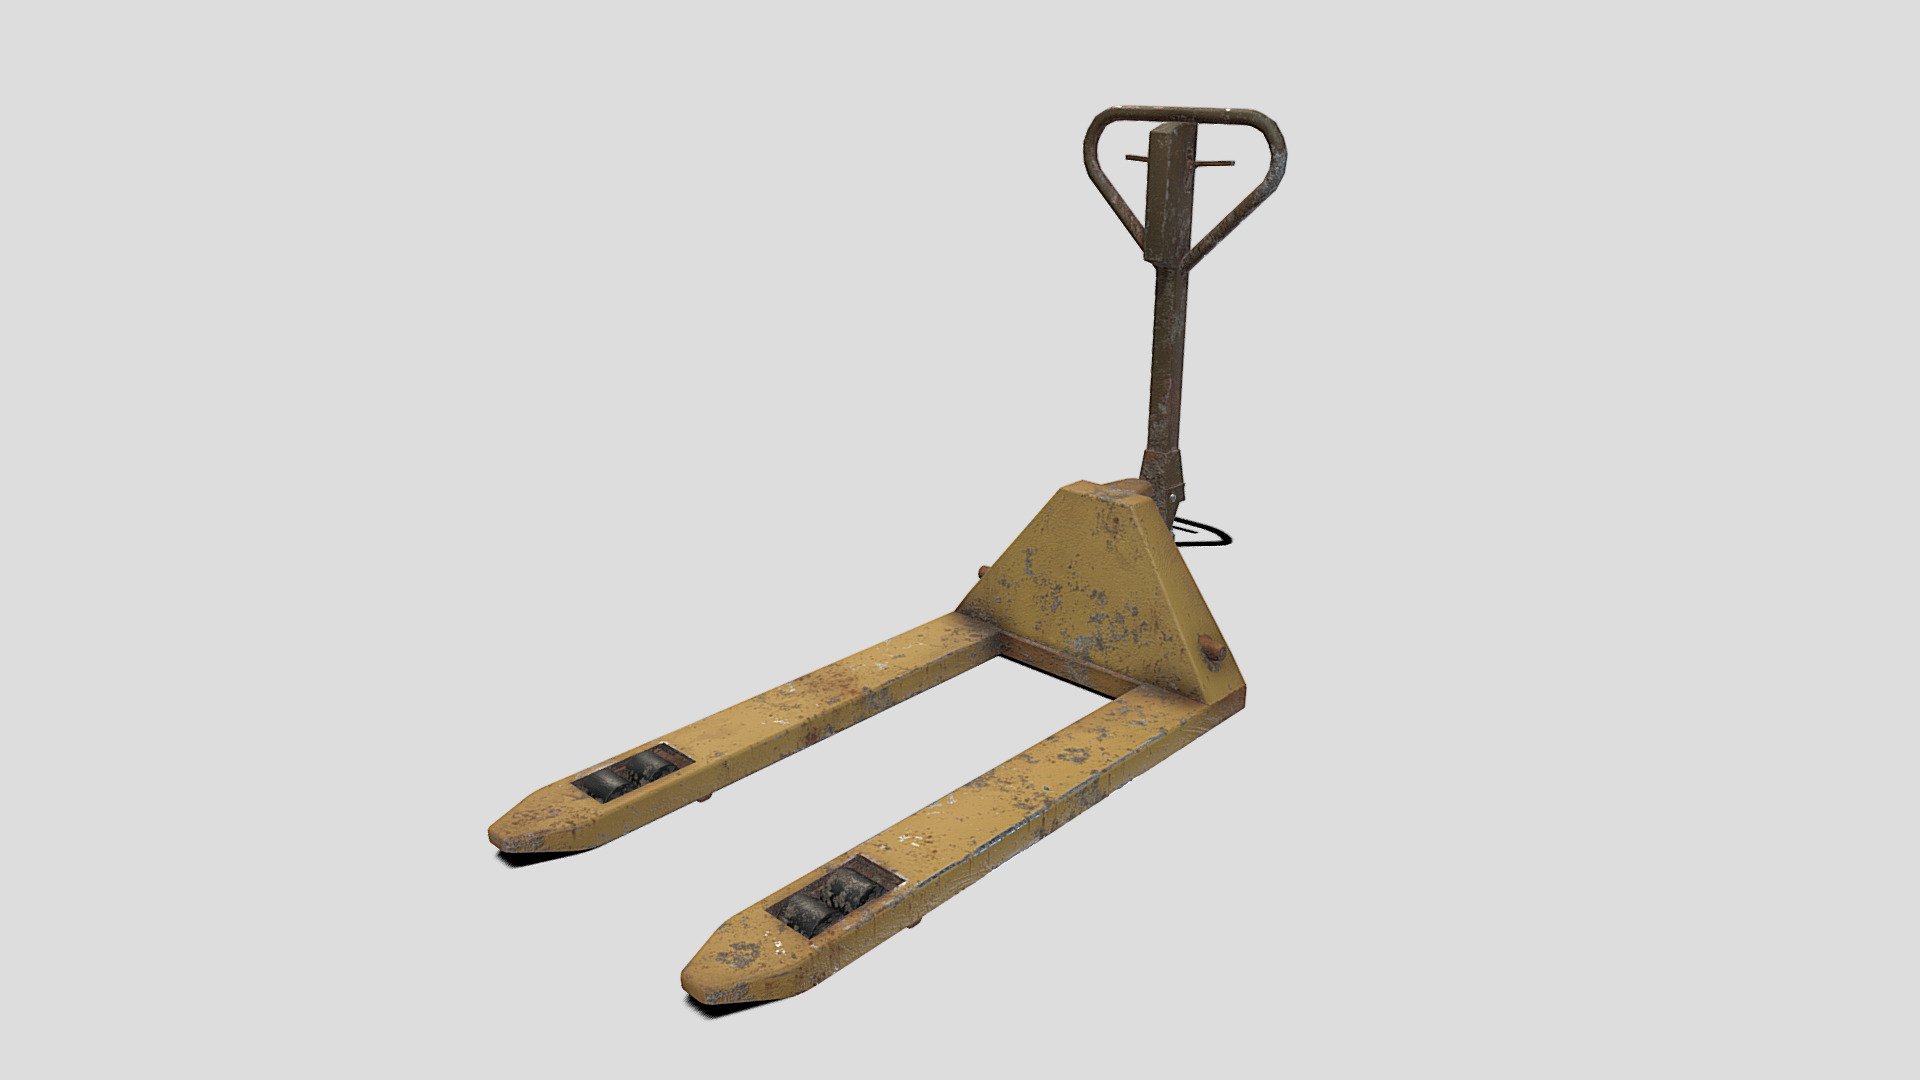 Pallet jack 3d model rendered with Cycles in Blender, as per seen on attached images. 
The model is scaled to real-life scale.

File formats:
-.blend, rendered with cycles, as seen in the images;
-.fbx, with materials applied;
-.obj, with materials applied;
-.dae, with materials applied;
-.stl;

Files come named appropriately and split by file format.

3D Software:
The 3D model was originally created in Blender 3.1 and rendered with Cycles.

Materials and textures:
The models have materials applied in all formats, and are ready to import and render.
Materials are image based using PBR, the model comes with one set of five 2k png image textures, 5 textures in total.

General:
The models are built mostly out of quads.

For any problems please feel free to contact me.

Don't forget to rate and enjoy! - Pallet Jack V2 - Buy Royalty Free 3D model by dragosburian 3d model